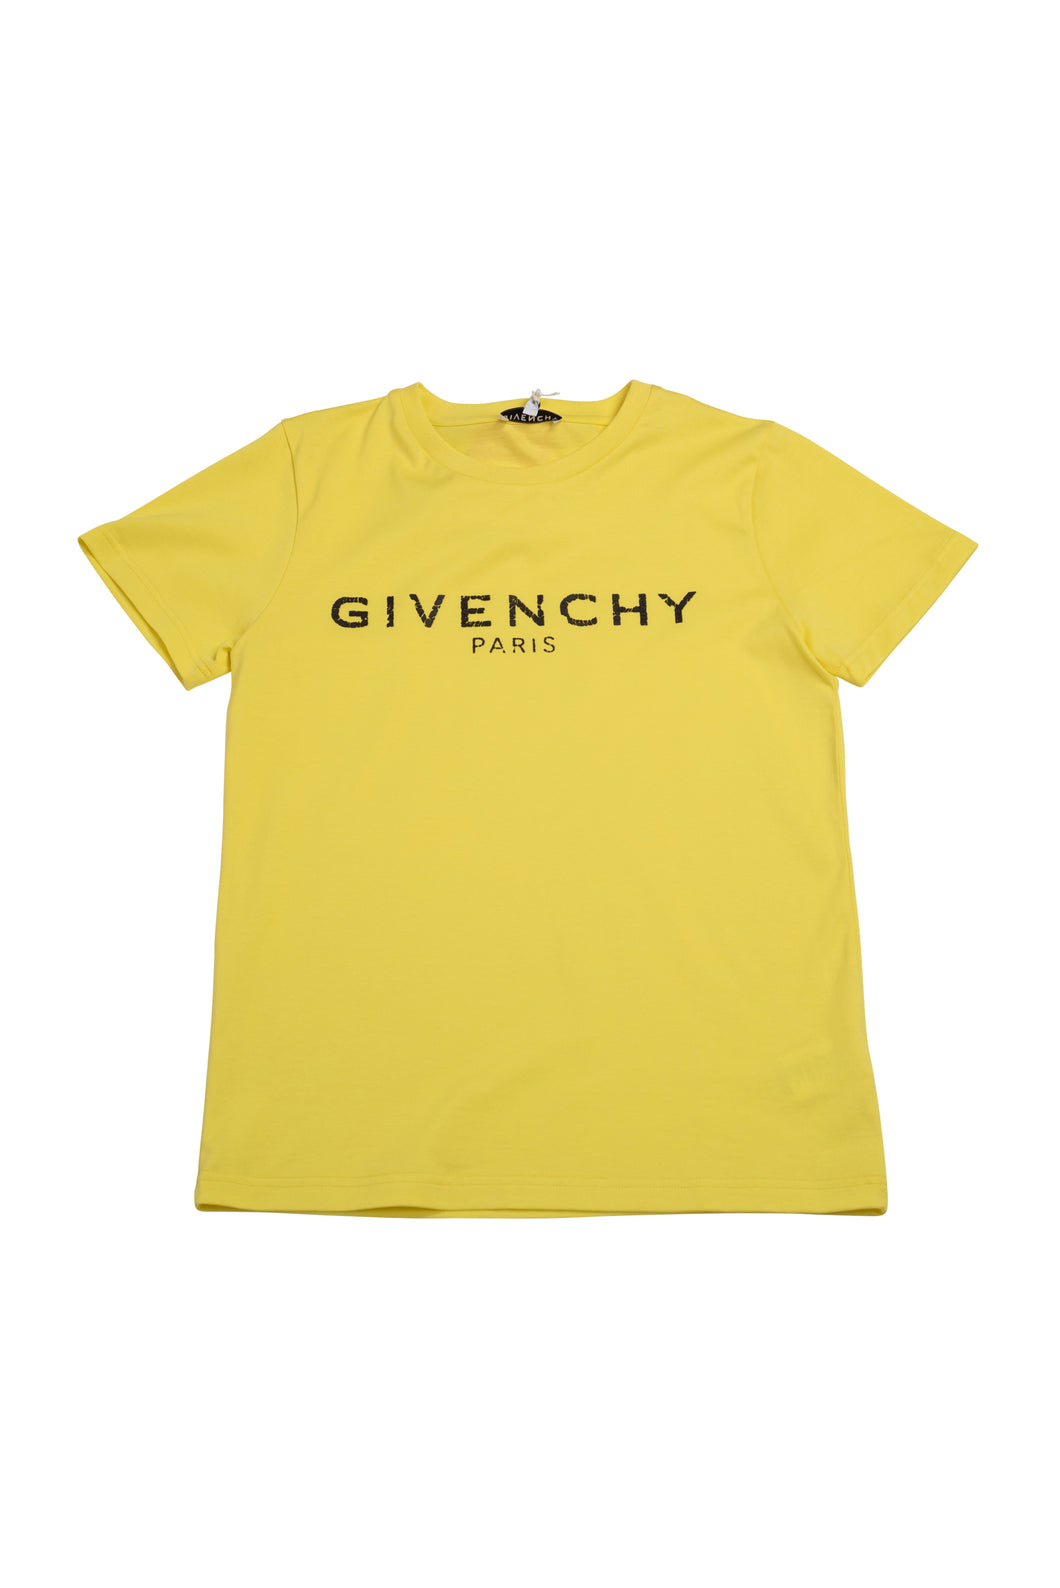 Total 58+ imagen givenchy yellow shirt